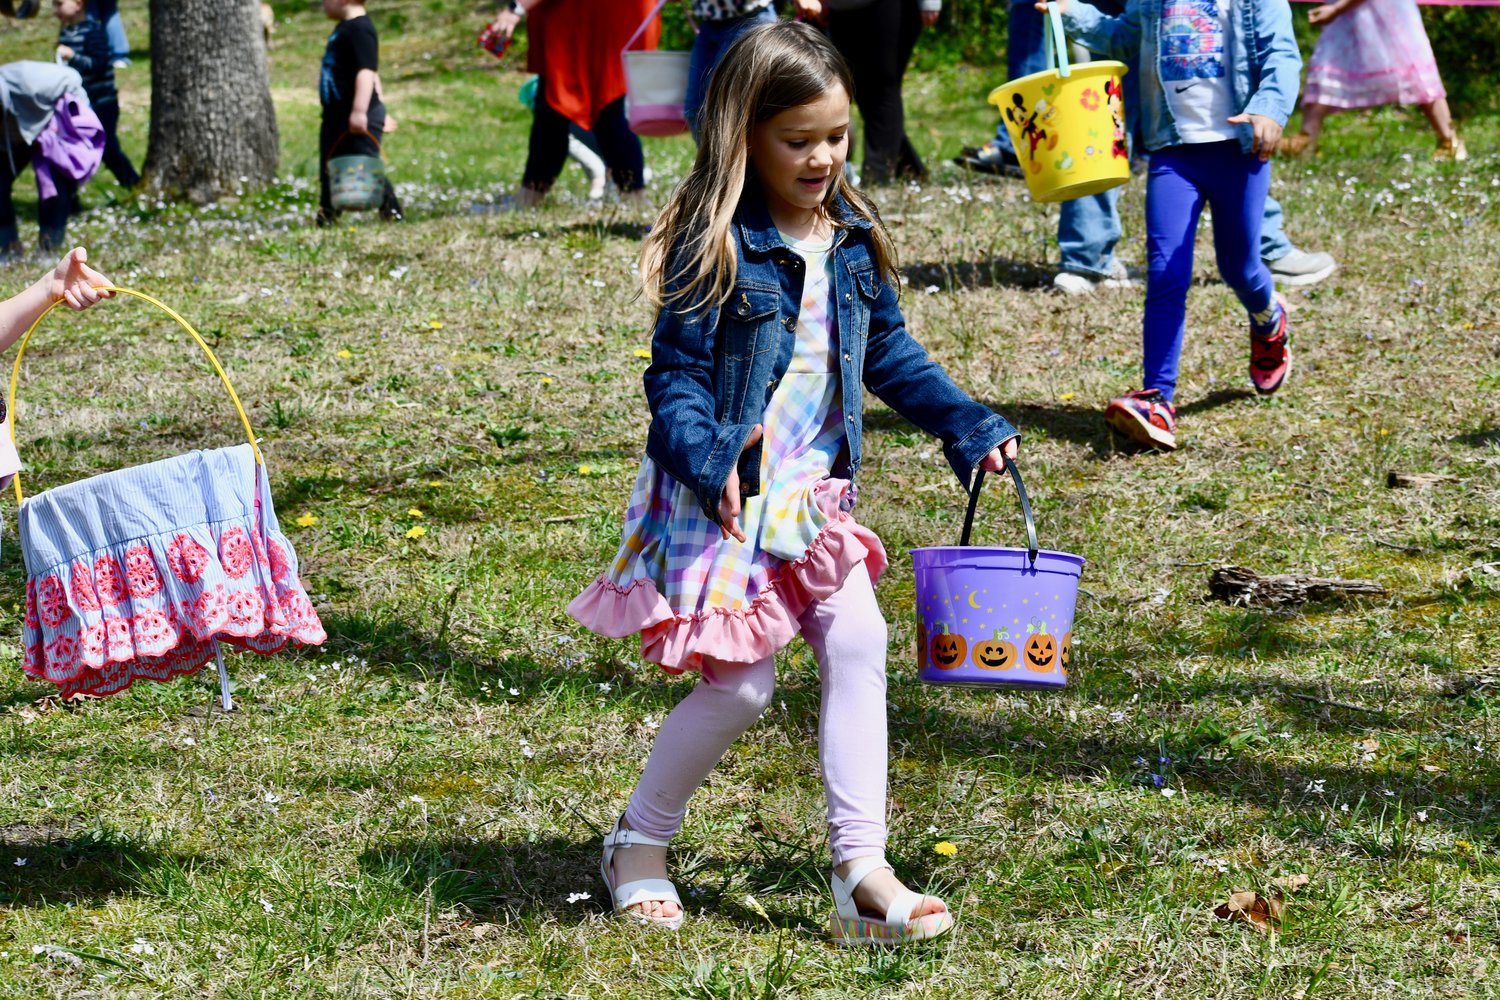 Clarcy Griswold moves quickly and has her basket ready to load up during the Easter egg hunt.